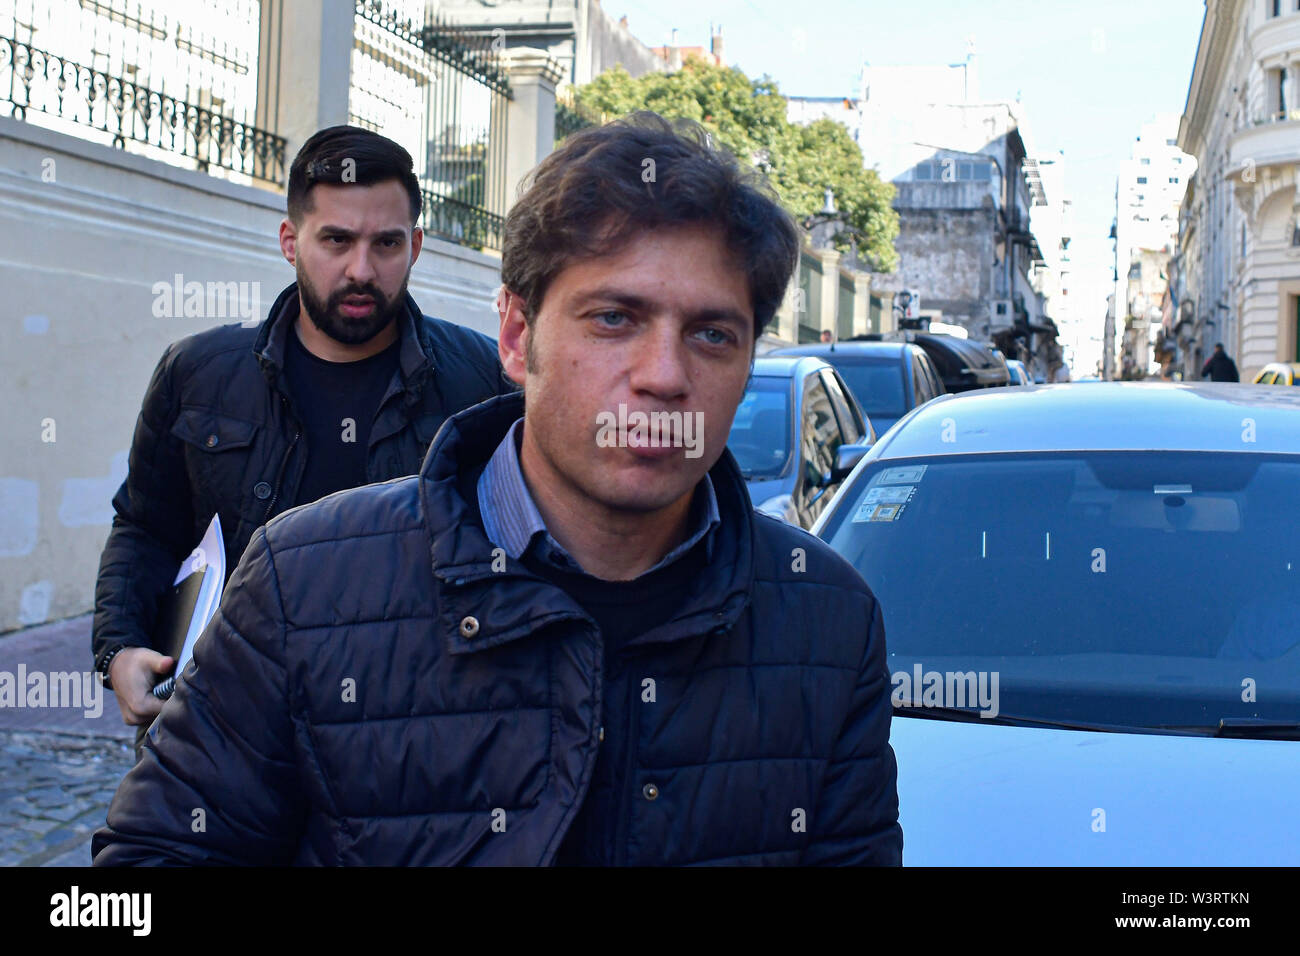 Buenos Aires, Buenos Aires, Argentina. 17th July, 2019. Congressman AXEL KICILOFF running for Governor of Buenos Aires Province with the front TODOS, arrives at a campaign meeting ahead of the upcoming general elections. Credit: Patricio Murphy/ZUMA Wire/Alamy Live News Stock Photo